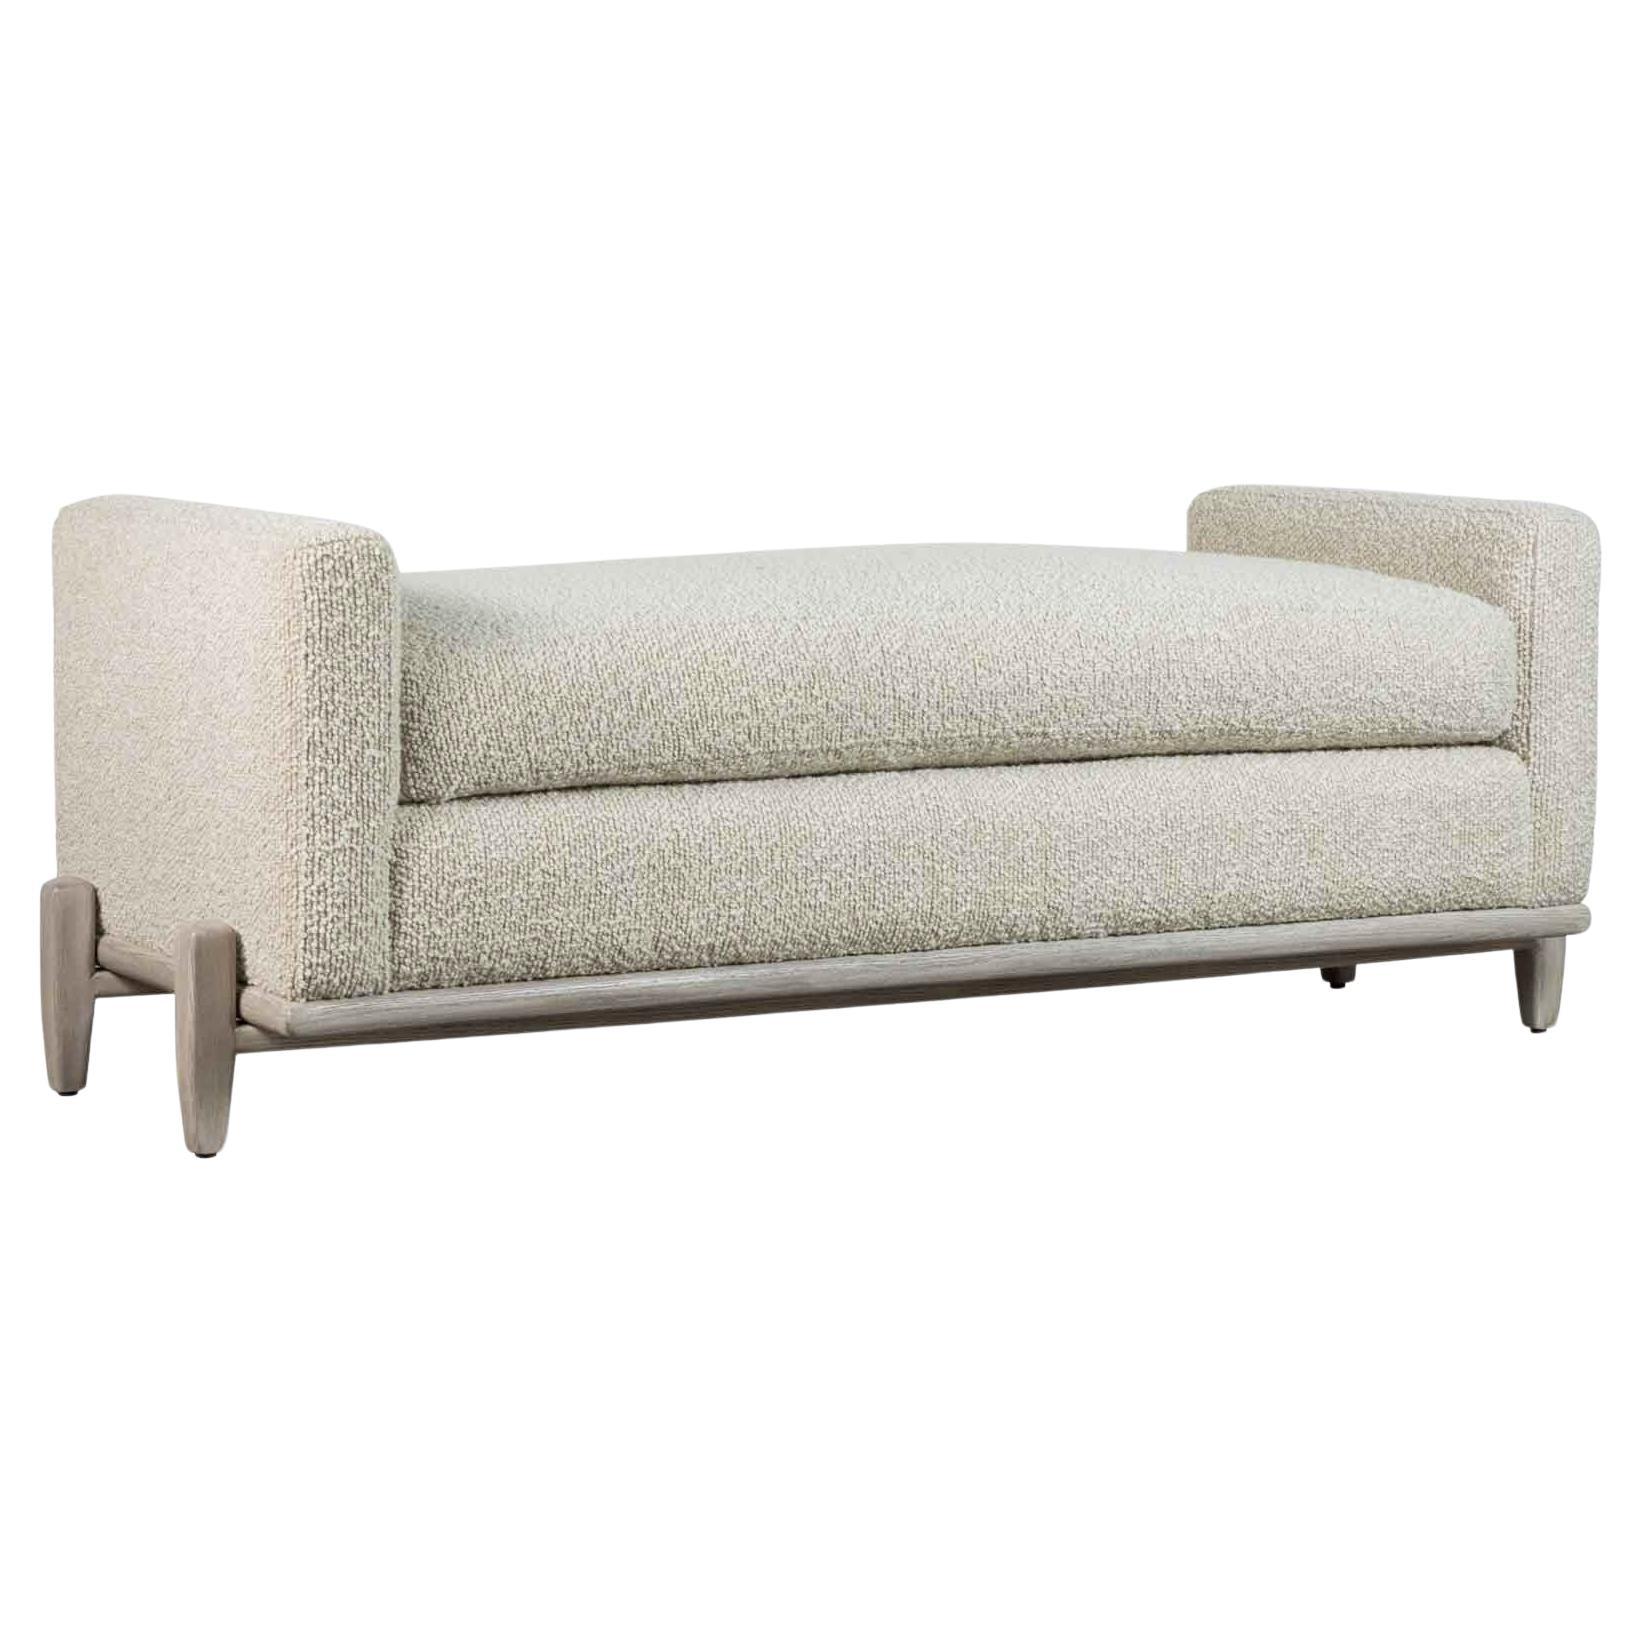 The George bench is part of the collaborative collection with interior designer Brian Paquette. The low profile silhouette sits above a sculpted solid wood base. This piece is available in exclusive BP for LF finishes as well as the standard